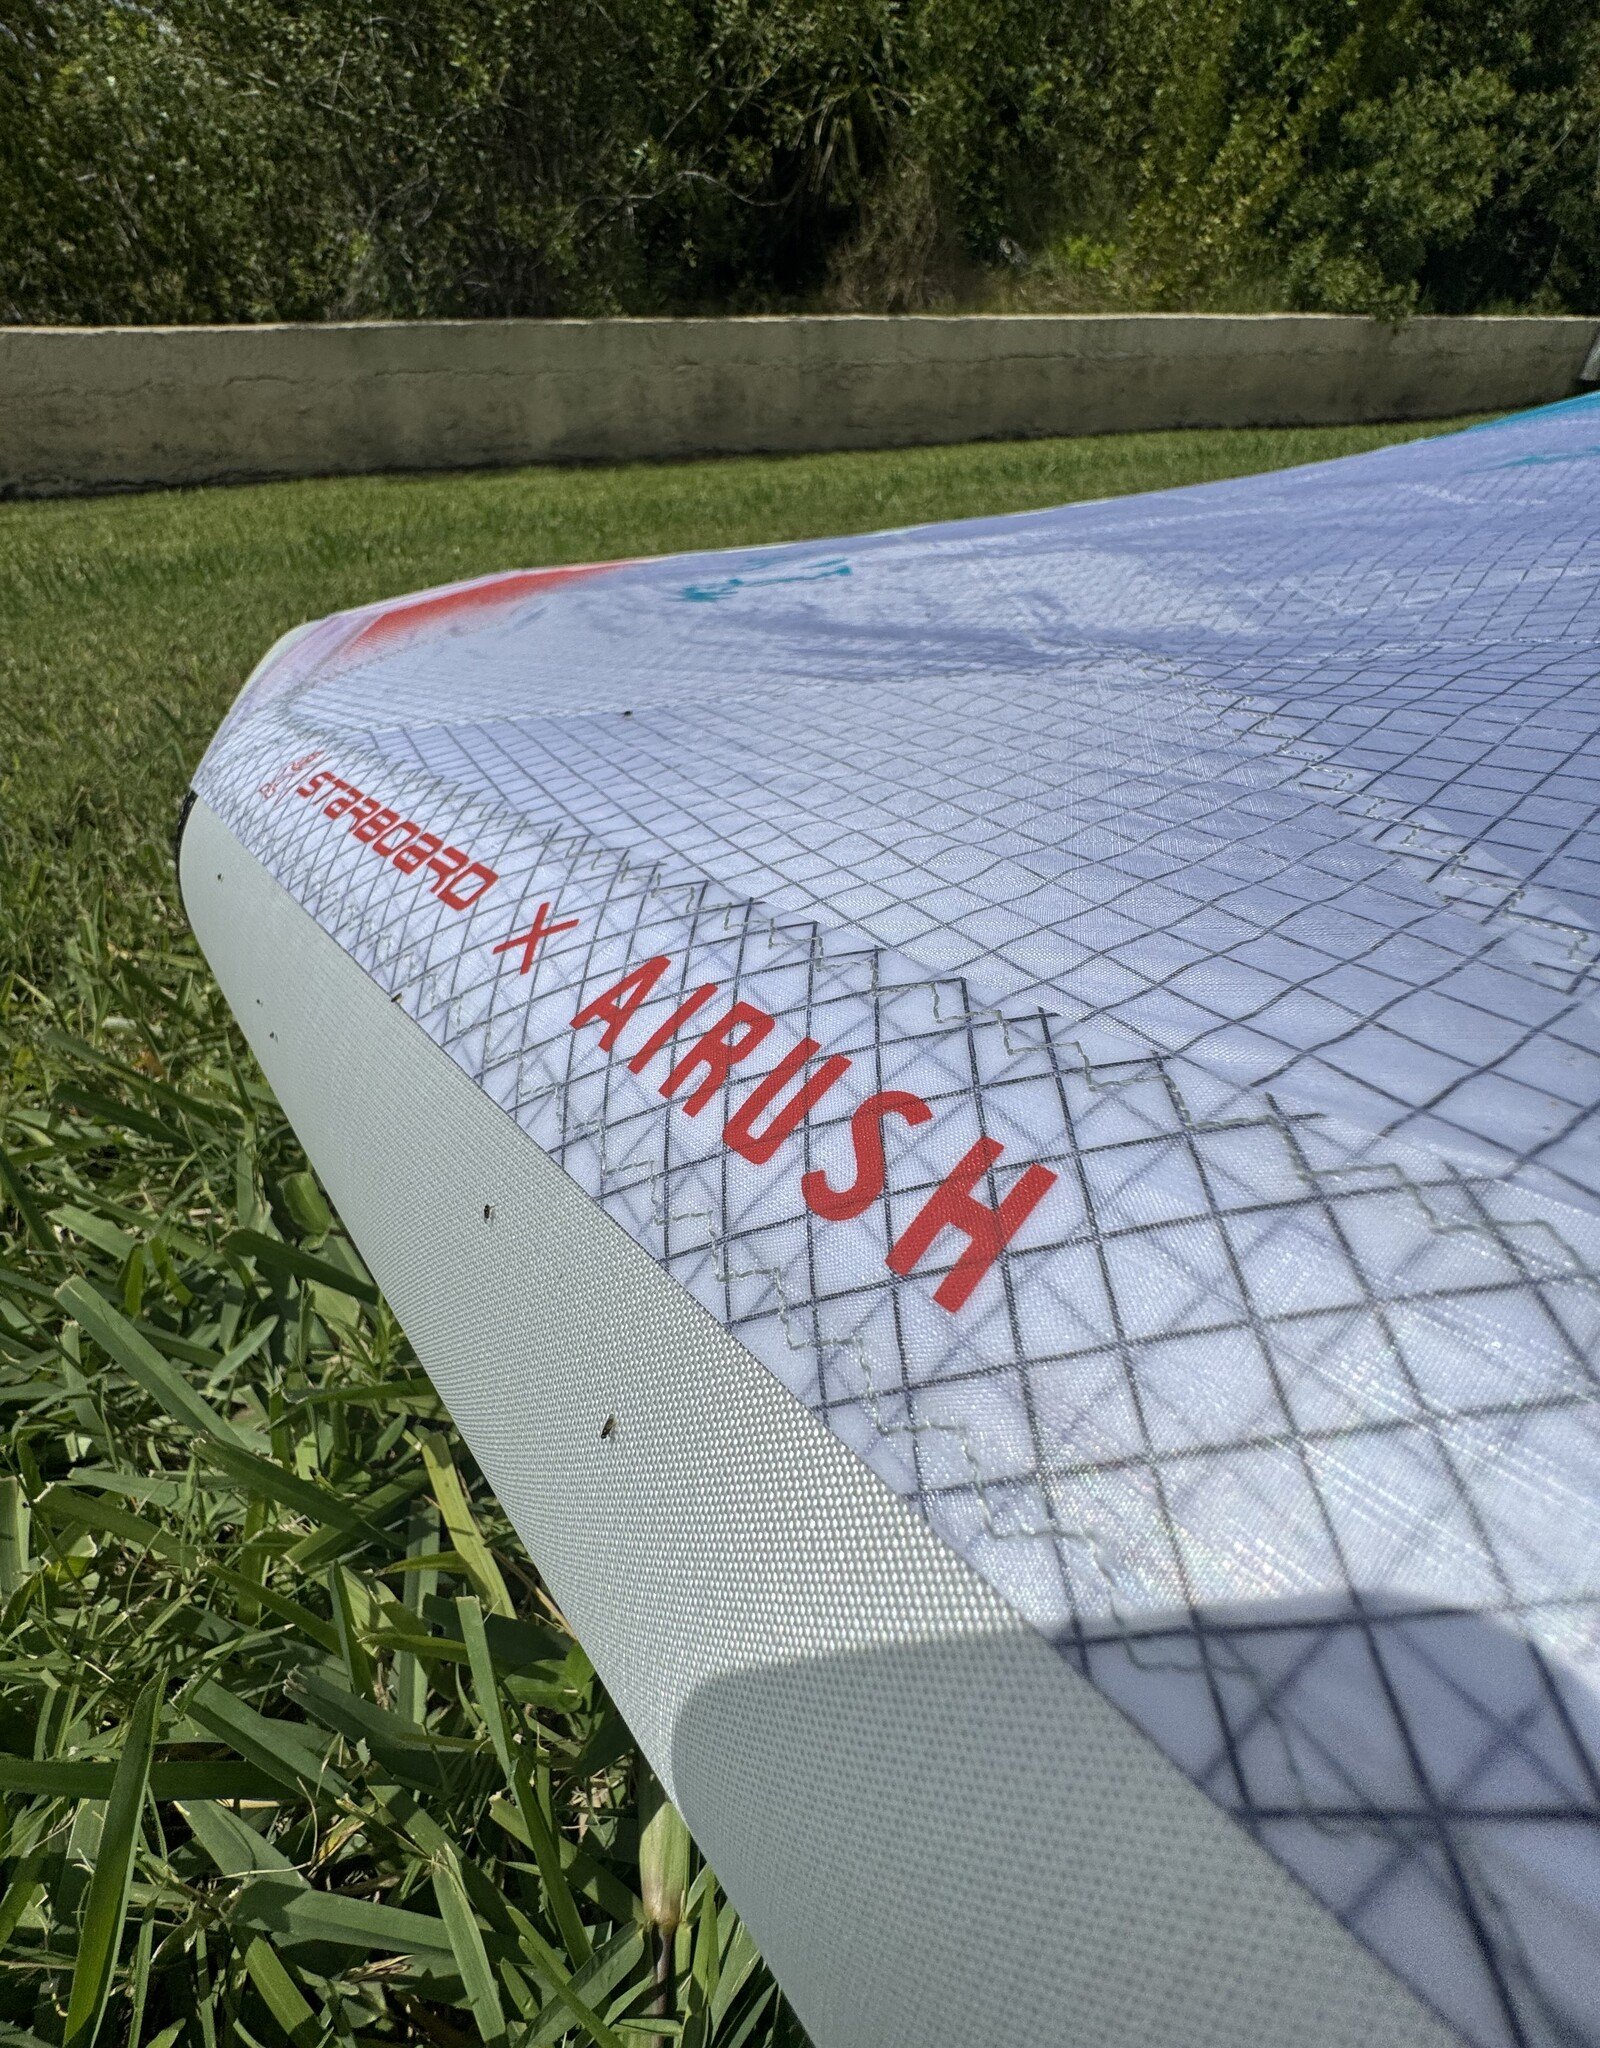 FREEWING FREEWING AIR TEAM 6M ULTRA X CANOPY AND HO'OKIPA AIRFRAME